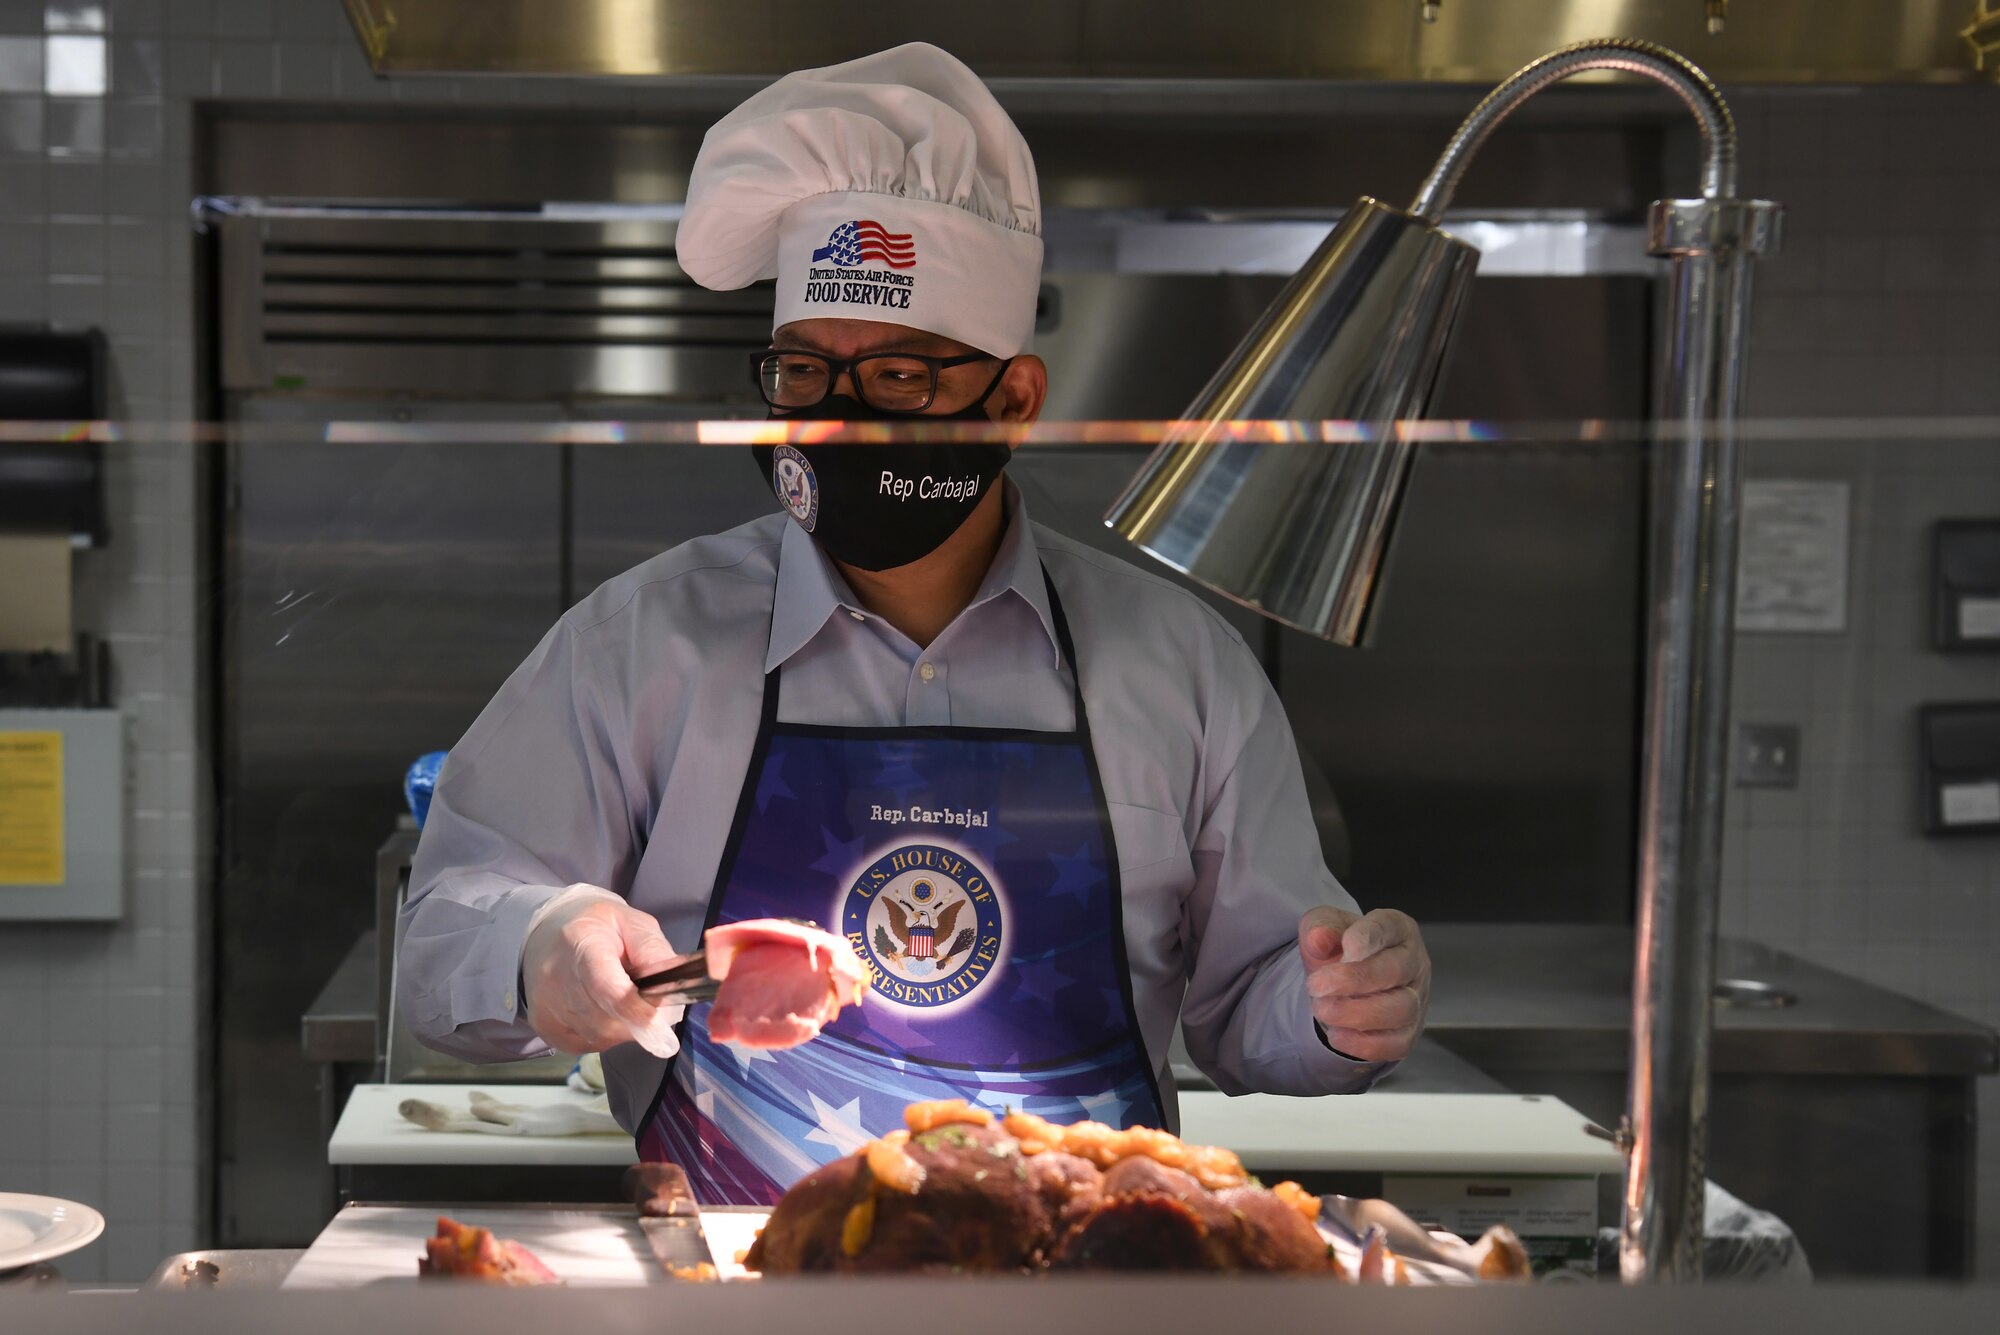 Rep. Salud Carbajal, United States Congressman, serves Thanksgiving meals to military and base members at the Breakers Dining Facility Nov. 26, 2020, at Vandenberg Air Force Base, Calif.